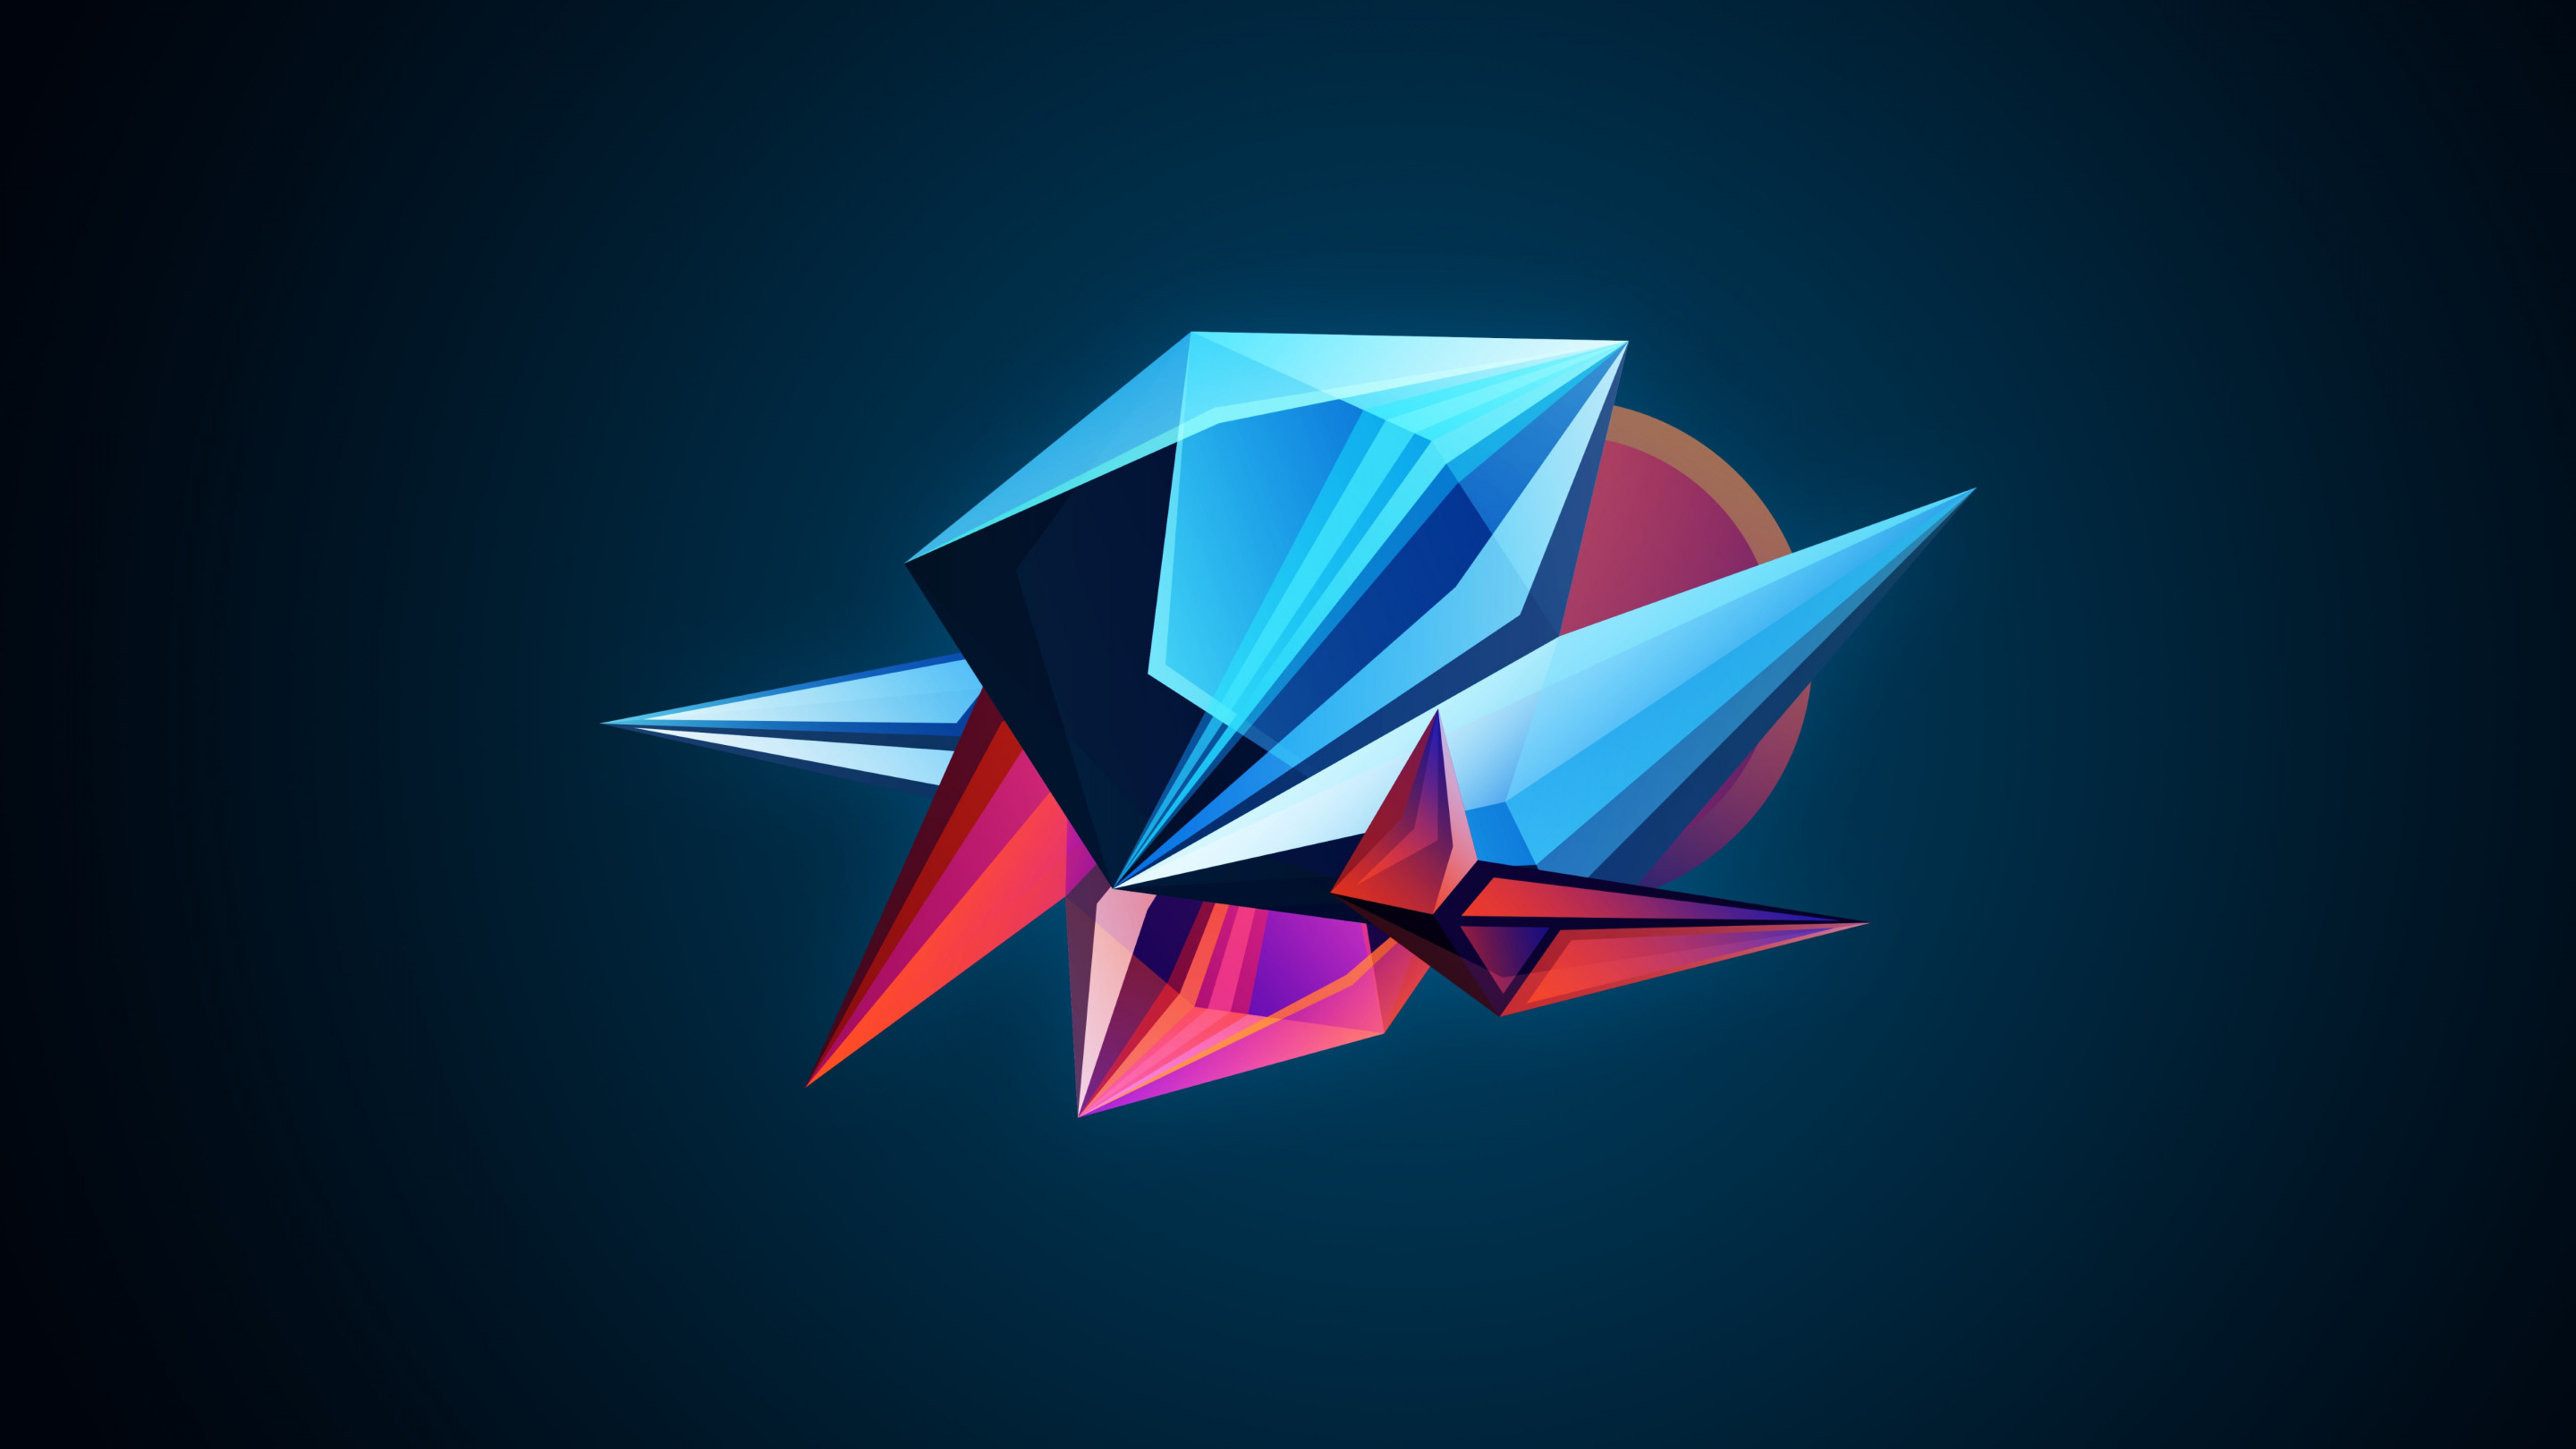 Abstract 3D shapes wallpaper 2880x1620